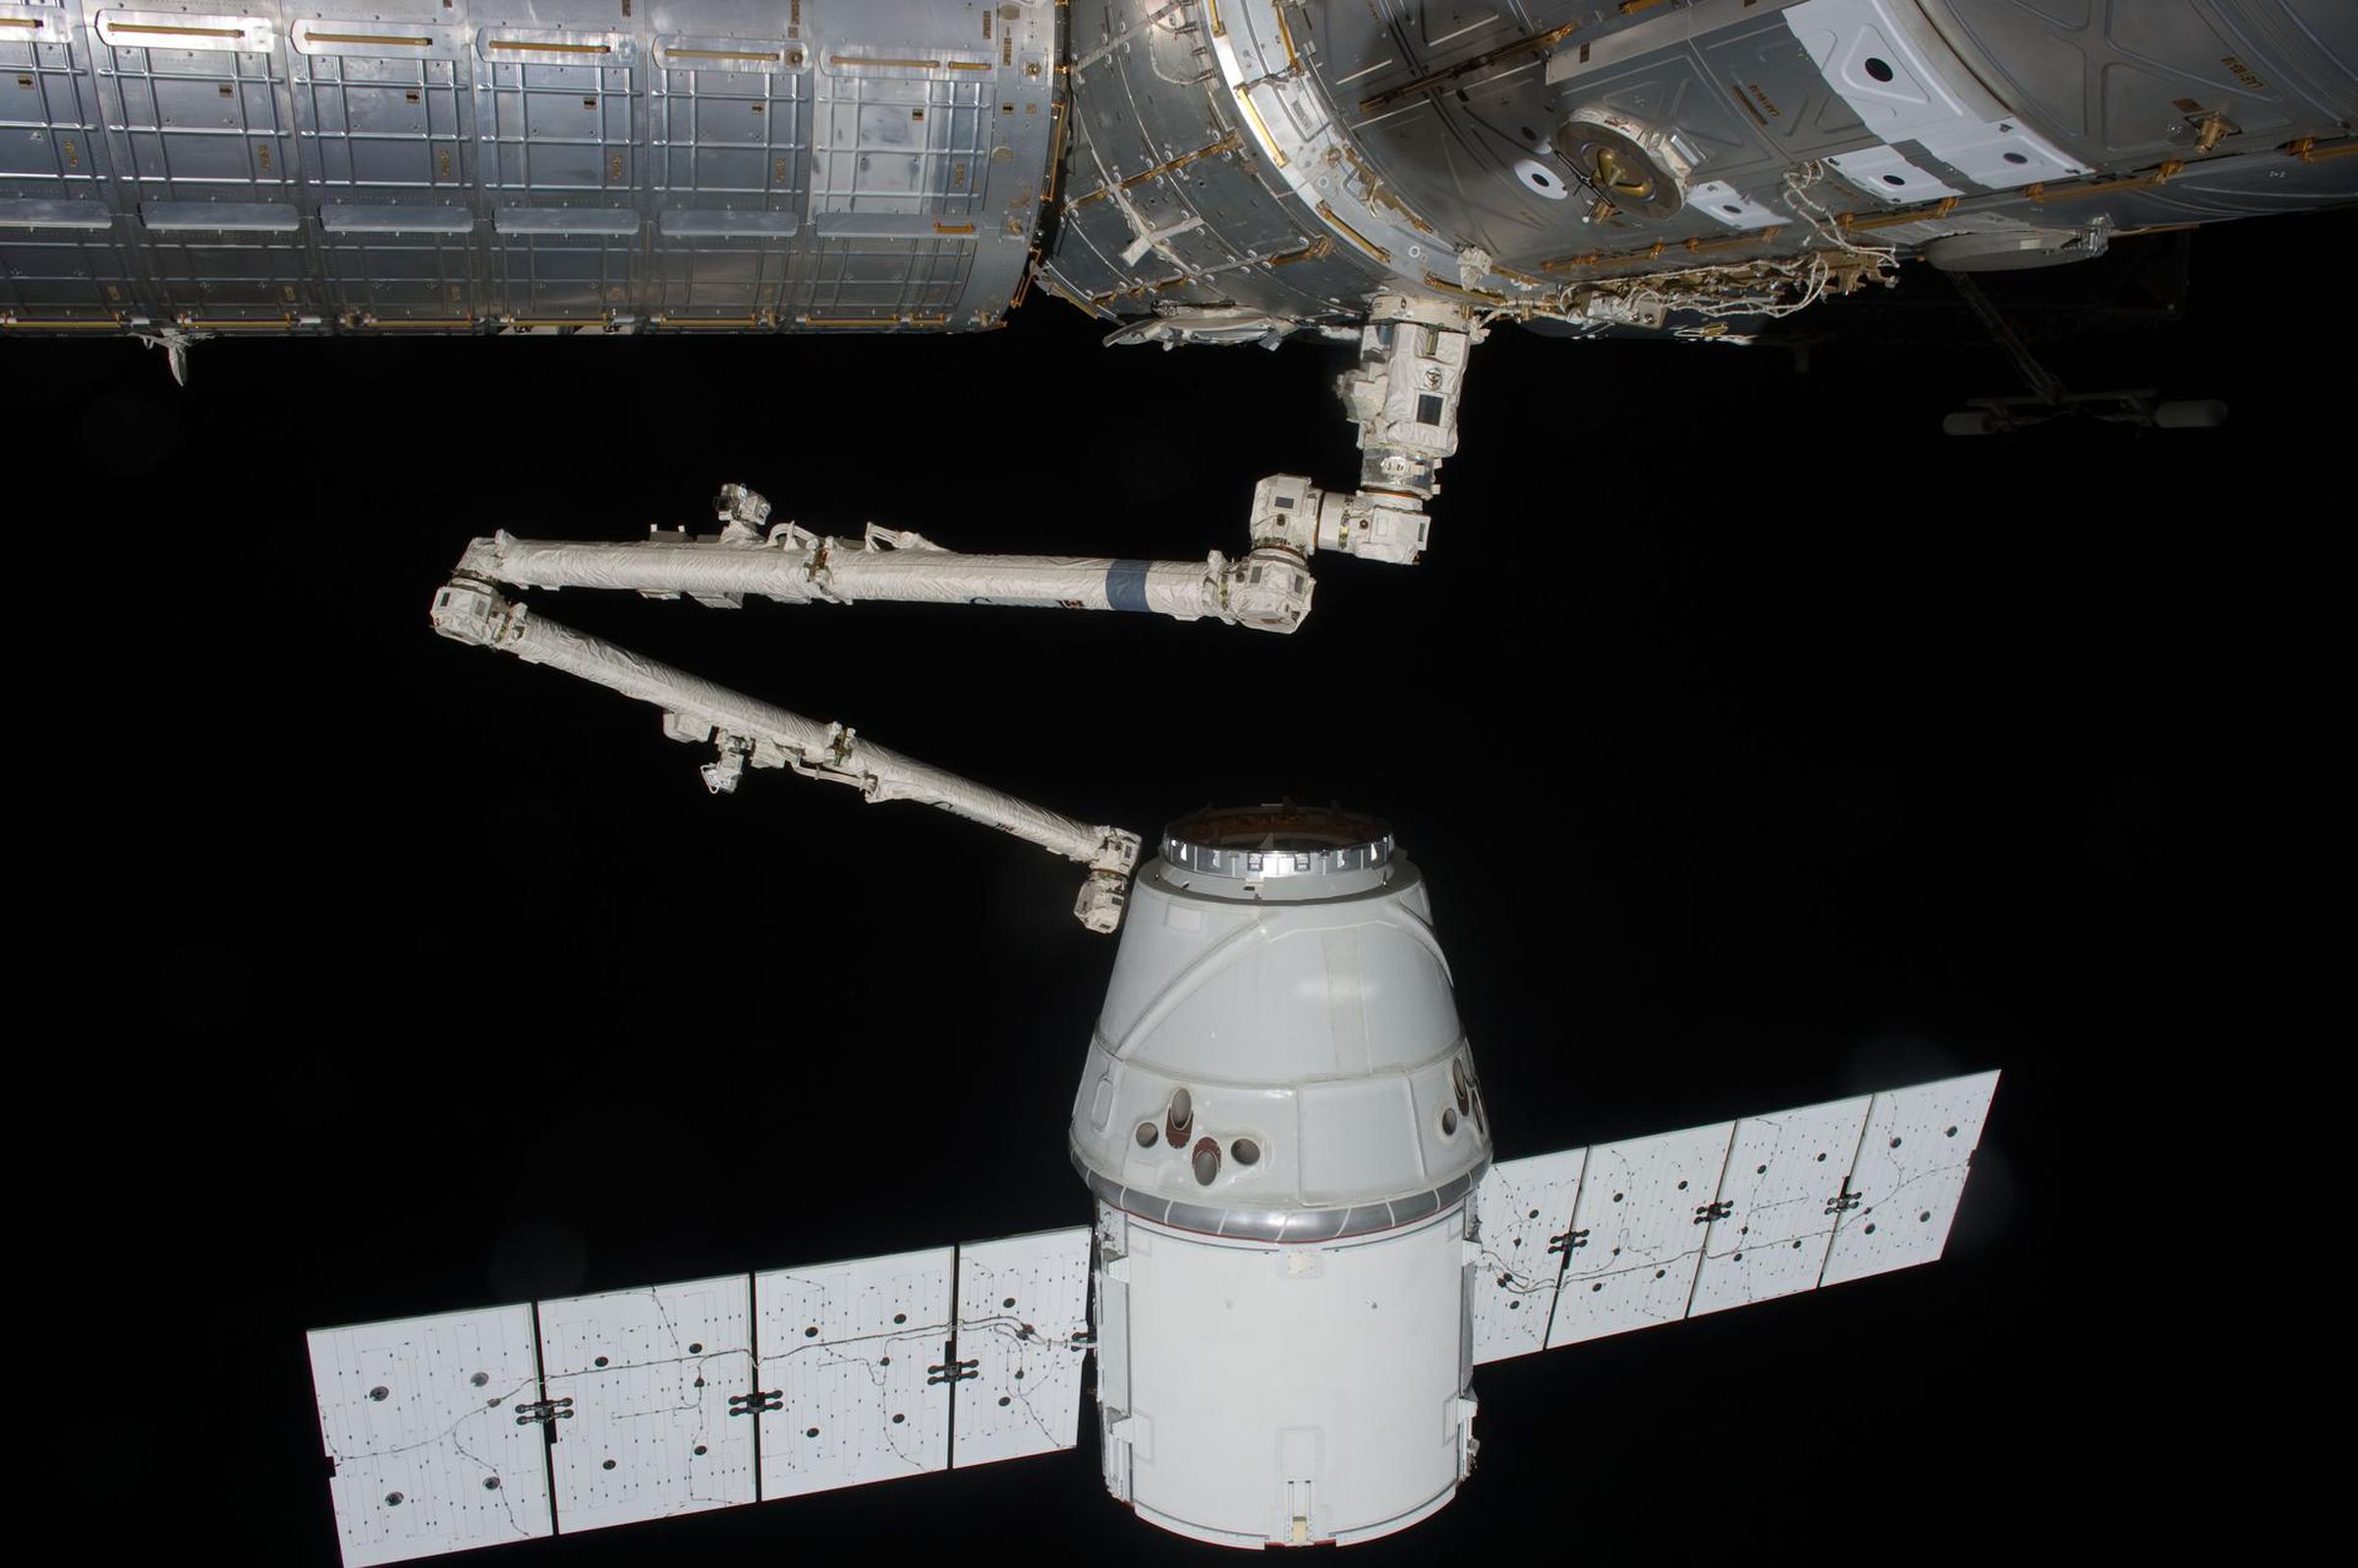 SpaceX’s cargo Dragon capsule became the first commercial vehicle to attach to the International Space Station in 2012.